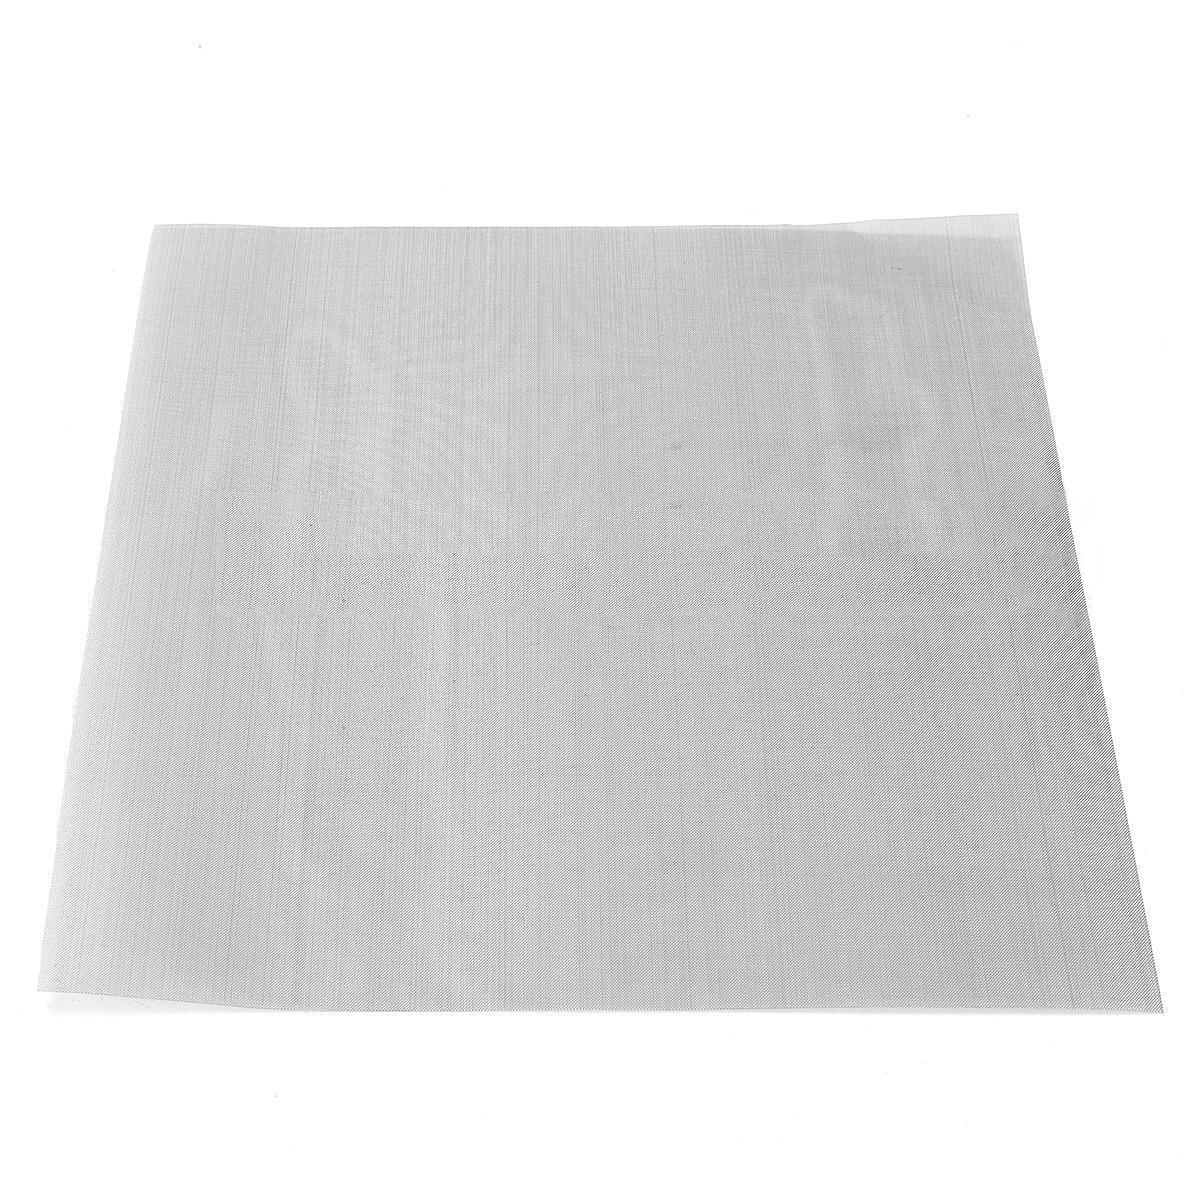 30*30cm 304 Stainless Steel Filtration #80 Woven Wire Mesh Cloth Screen